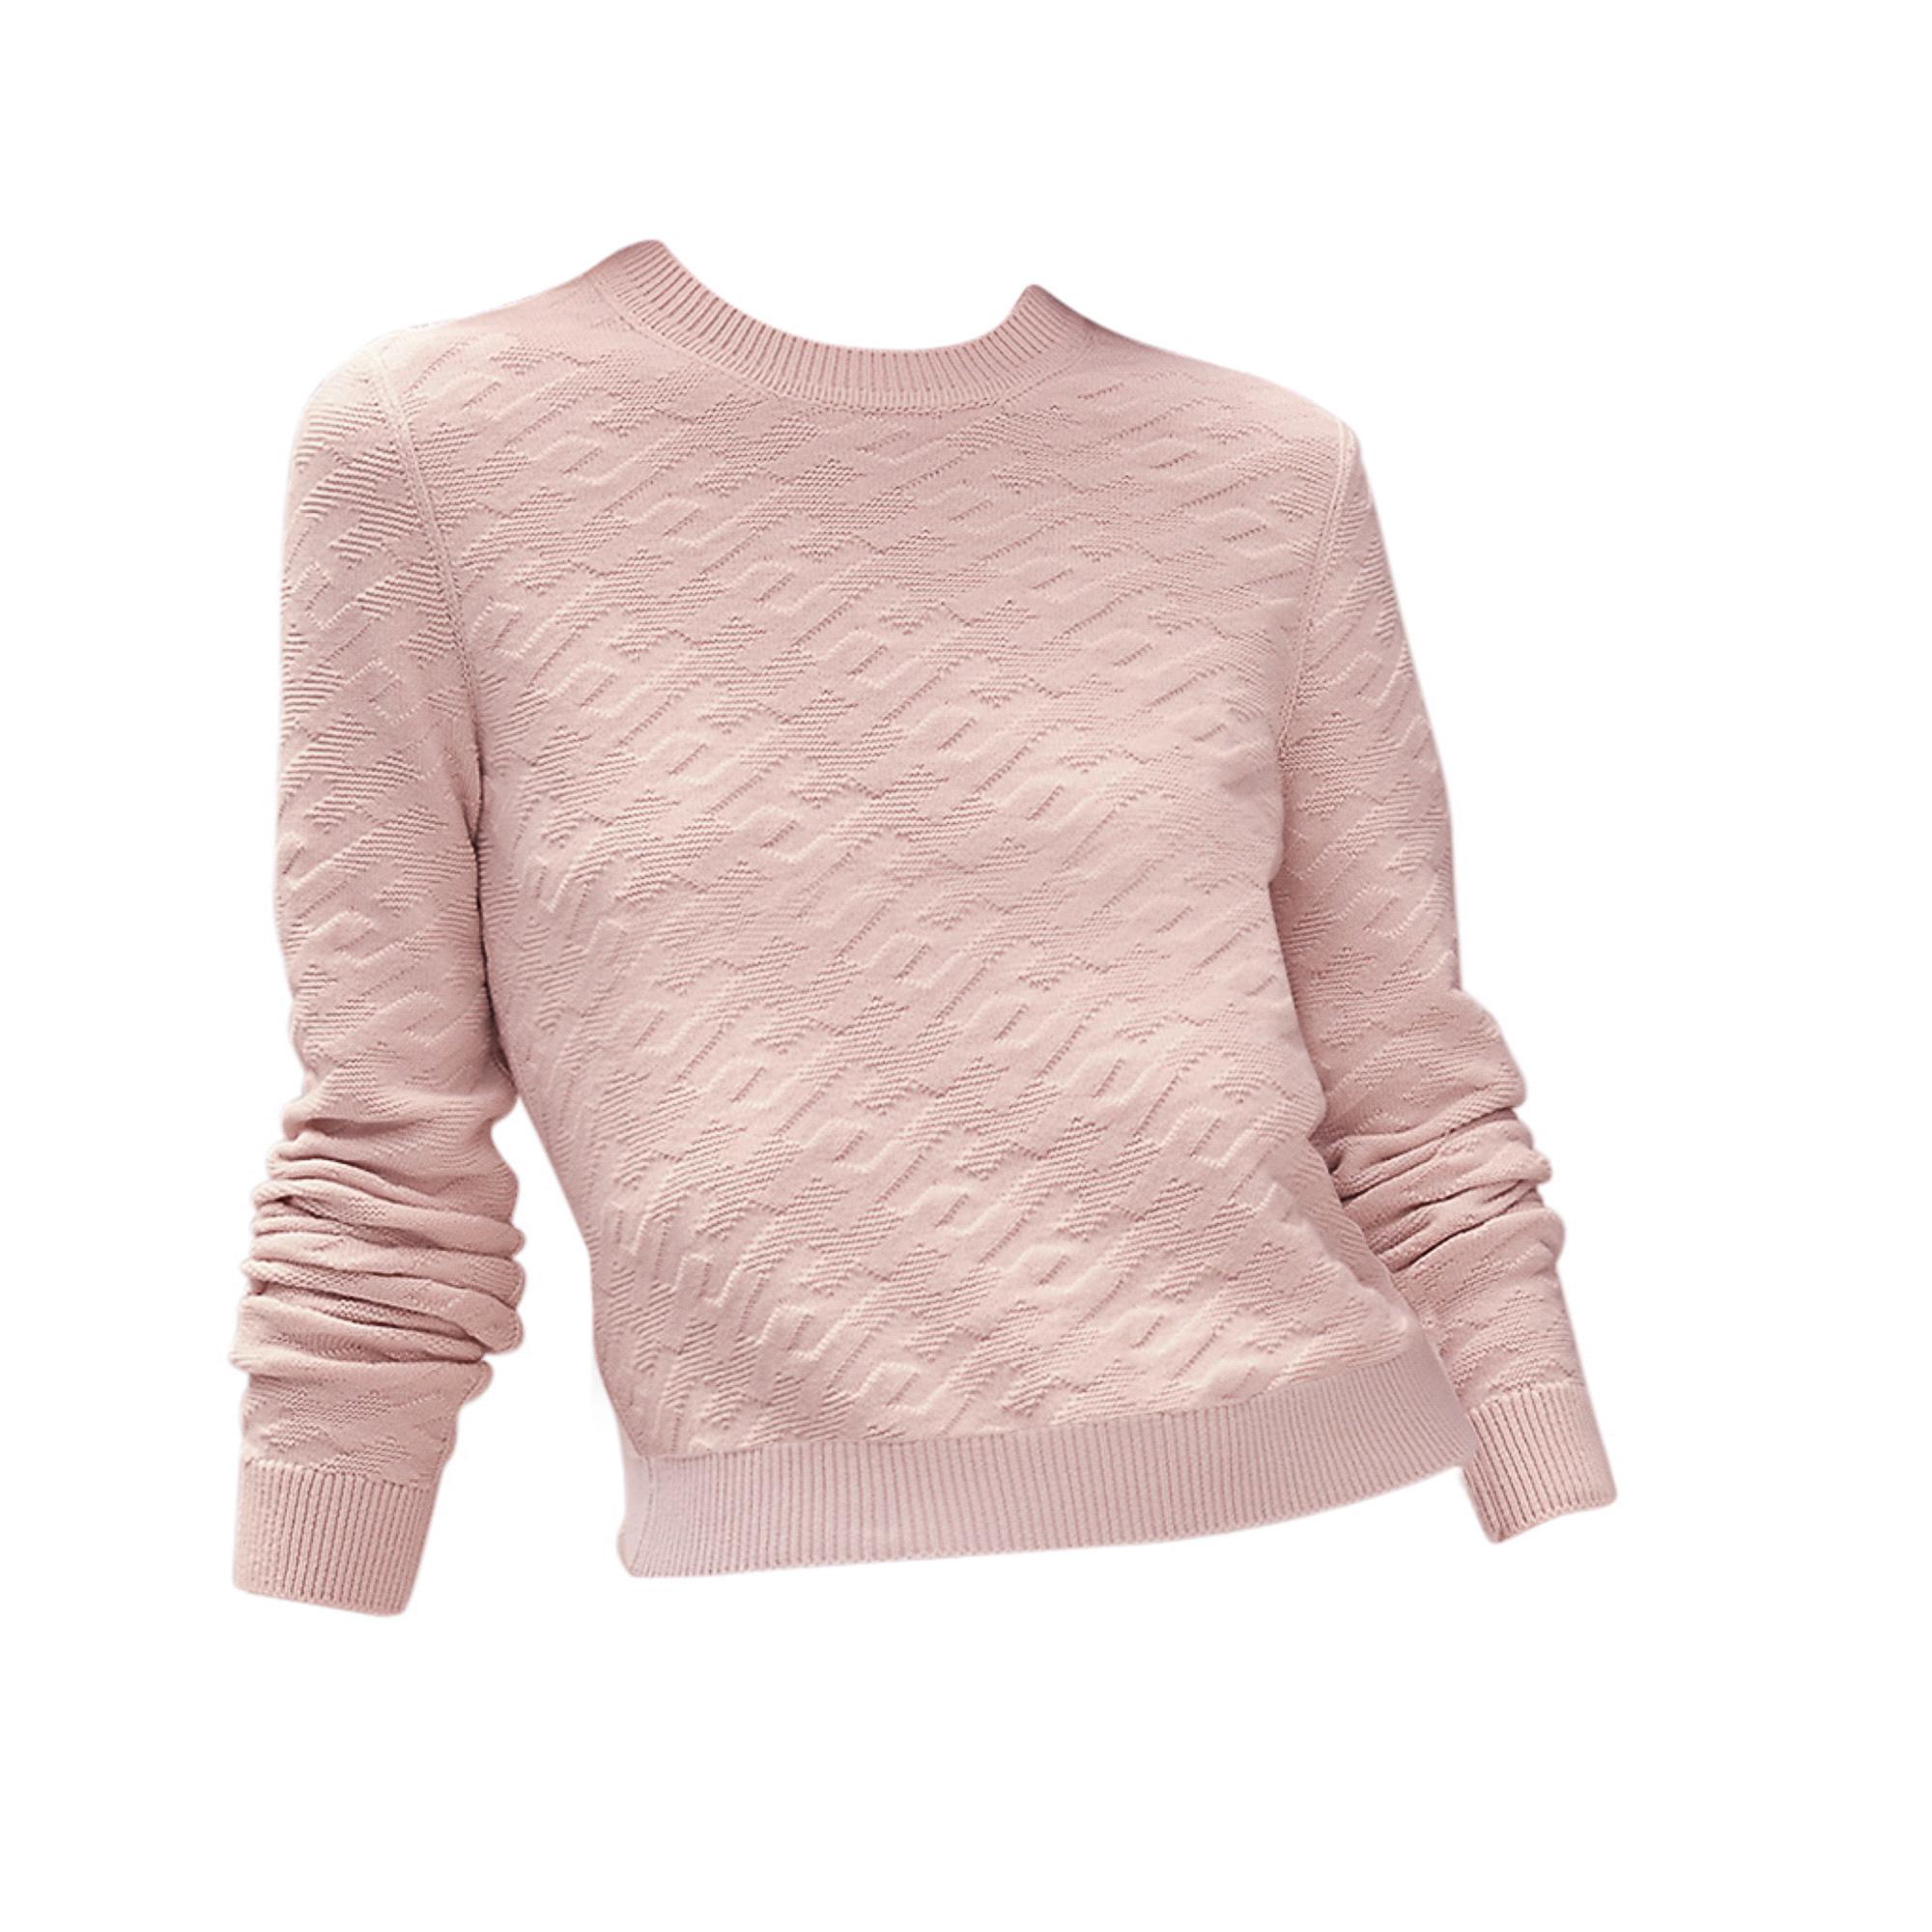 Mightychic offers an Hermes Loungewear Voyage sweater featured in Rose Petale.
Loungewear Voyage wool knit in the palest rose.
Crewneck sweater H embossed throughout.
Ribbing at hip and cuffs.
Made in Italy.
Has matching jogging pant - this listing